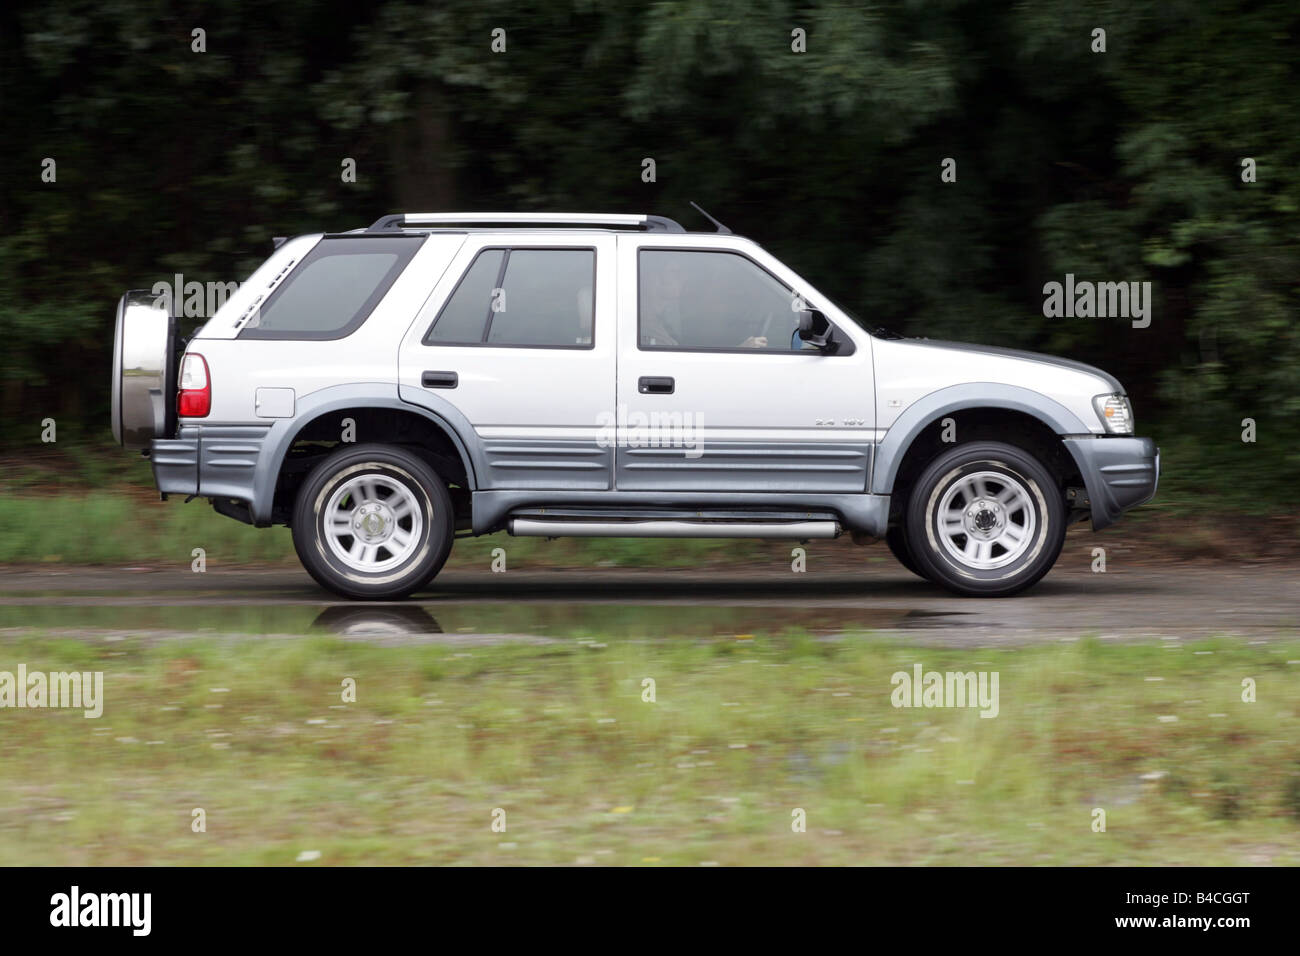 Car, Land breeze, cross country vehicle, model year 2005-, silver, driving, side view, country road Stock Photo